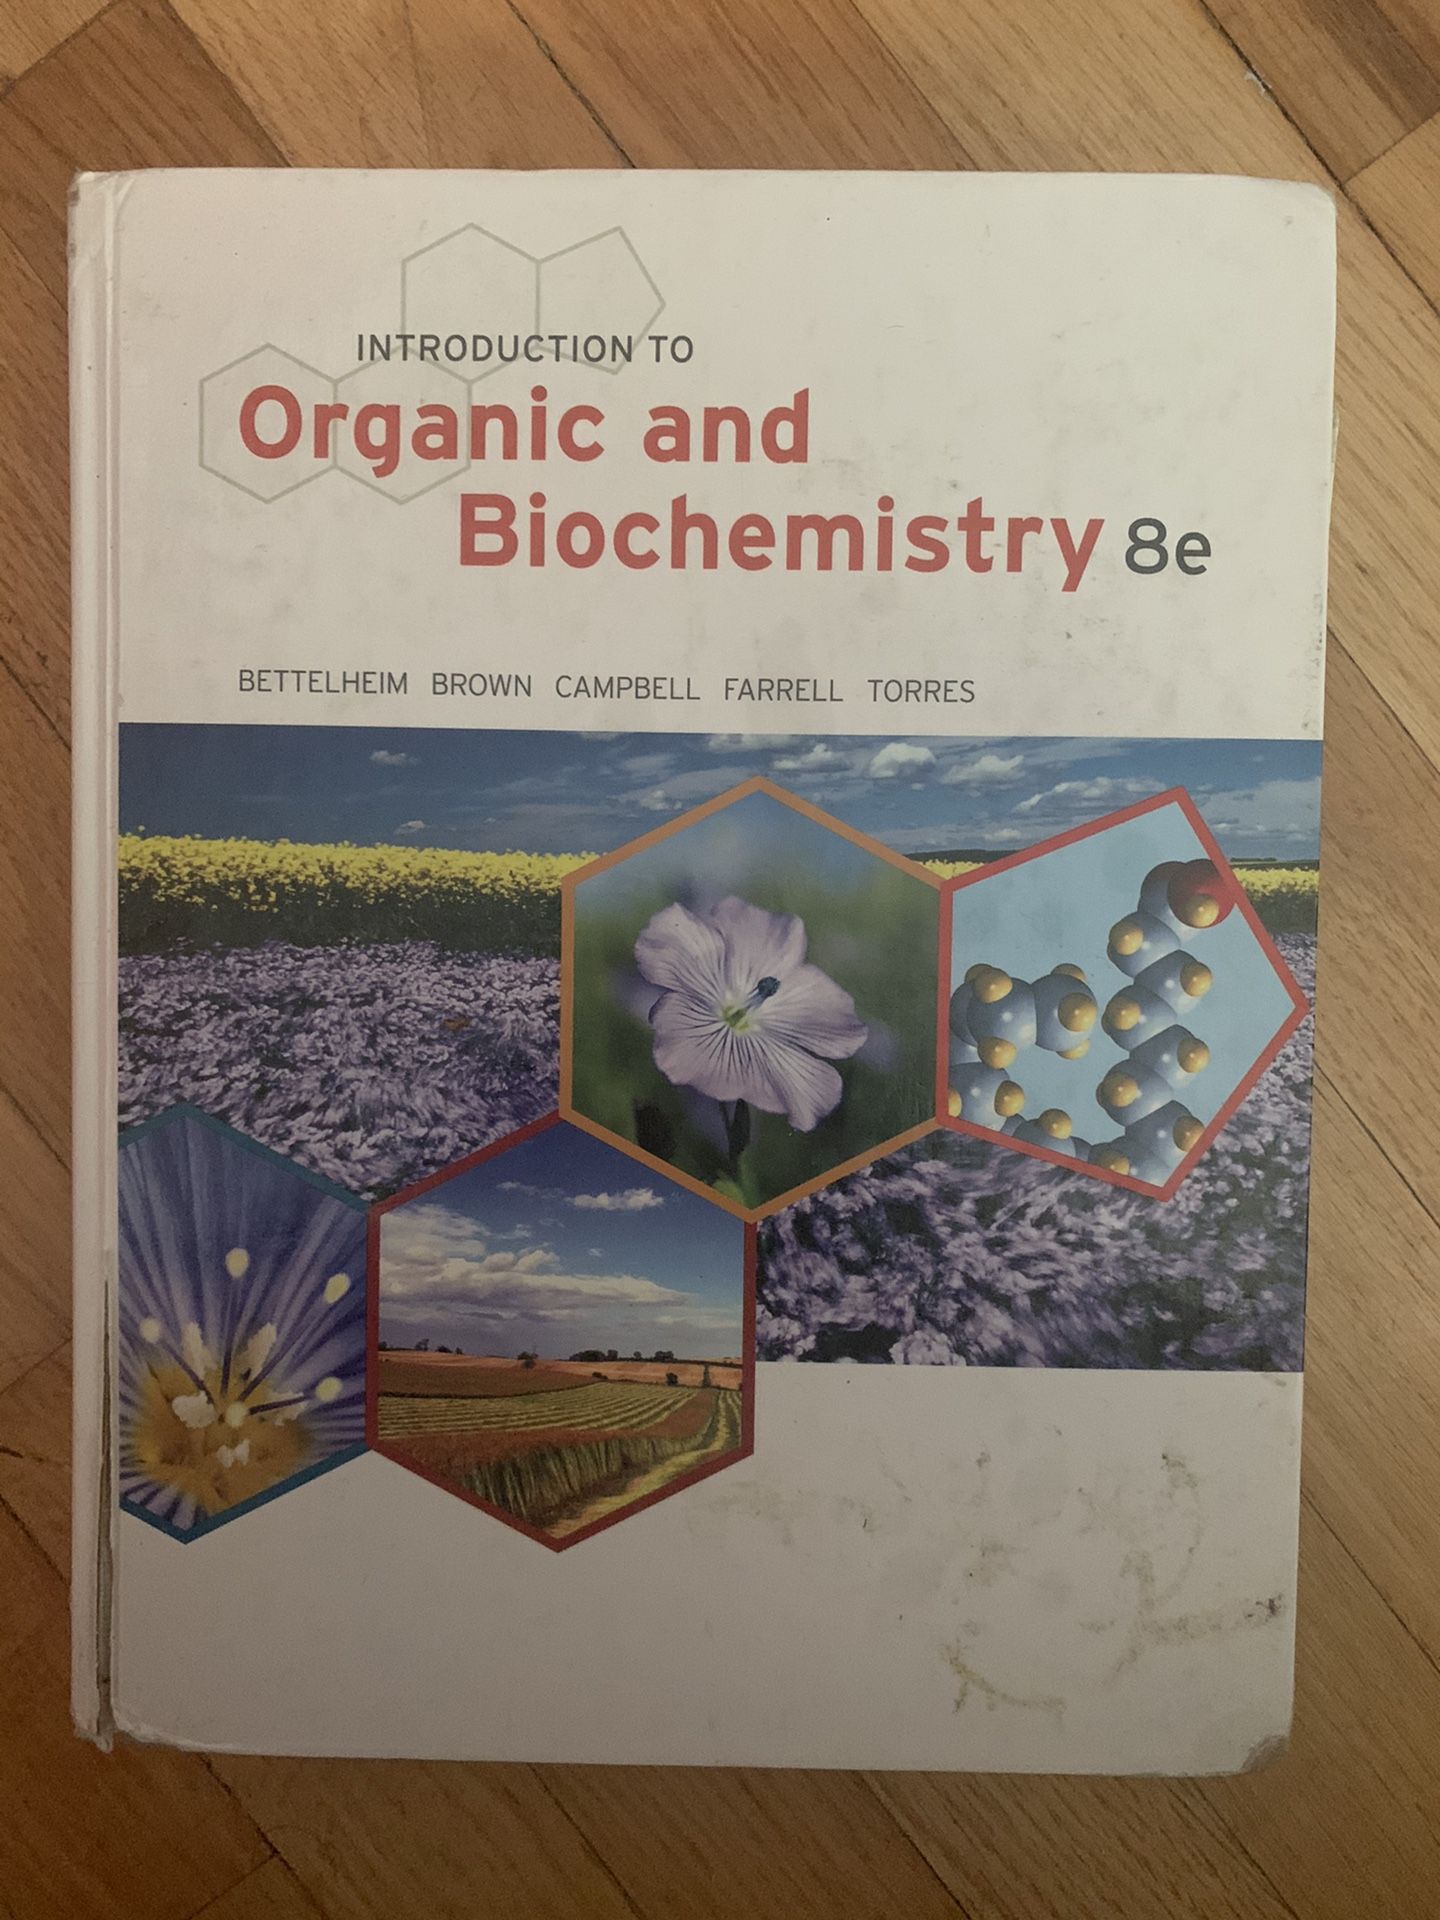 Introduction to Organic and Biochemistry 8e